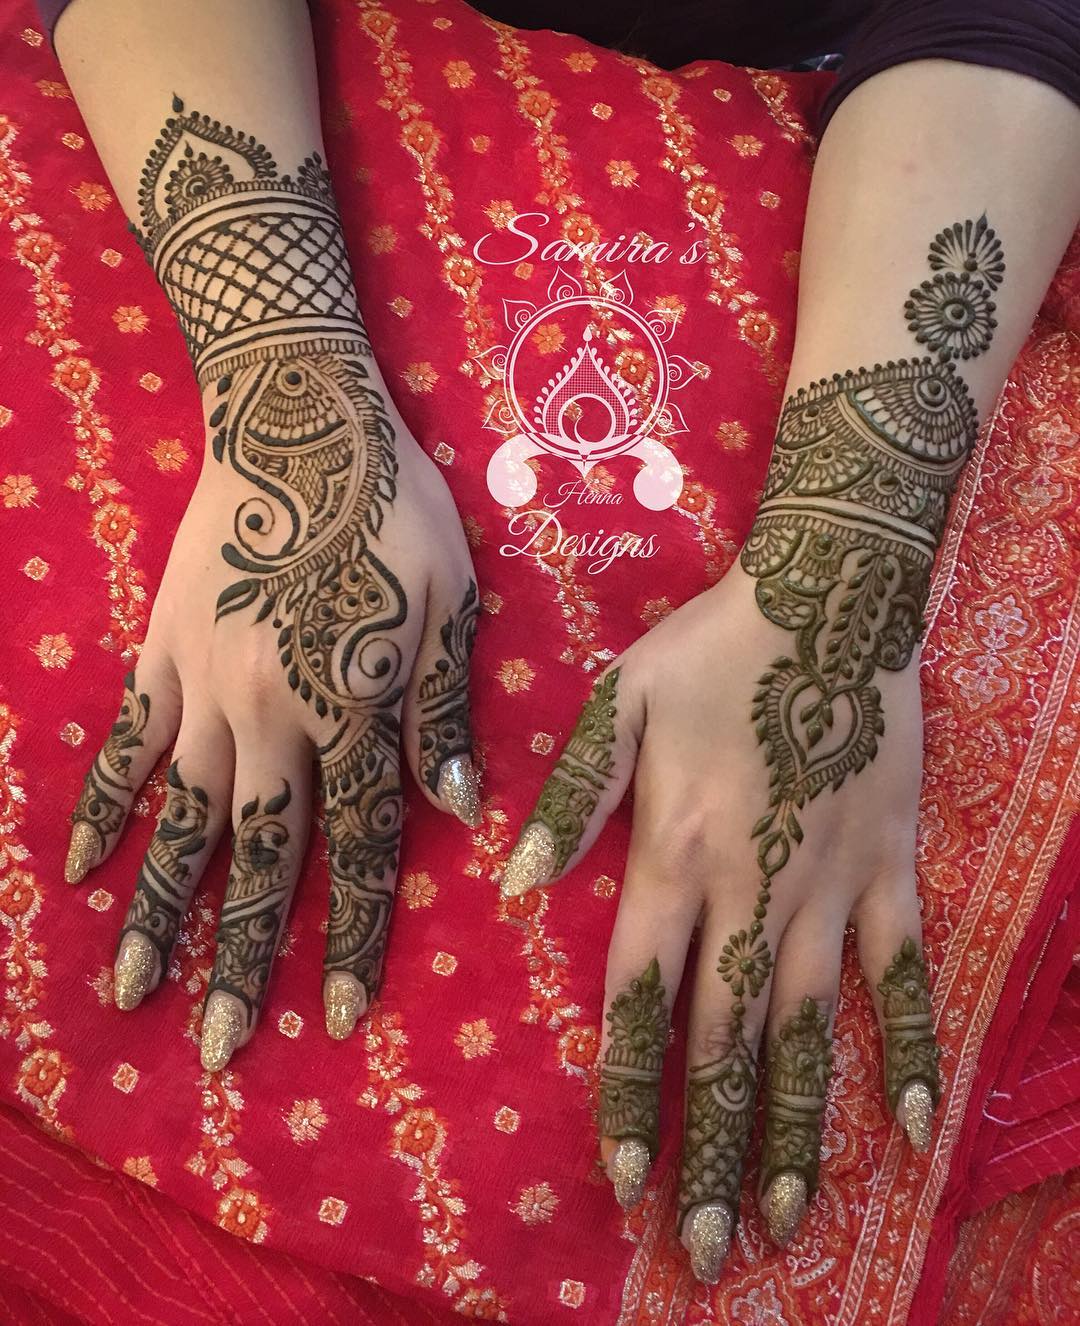 Mehndi designs simple and easy arabic | Best mehndi designs, Mehndi designs  for hands, Mehndi designs for beginners